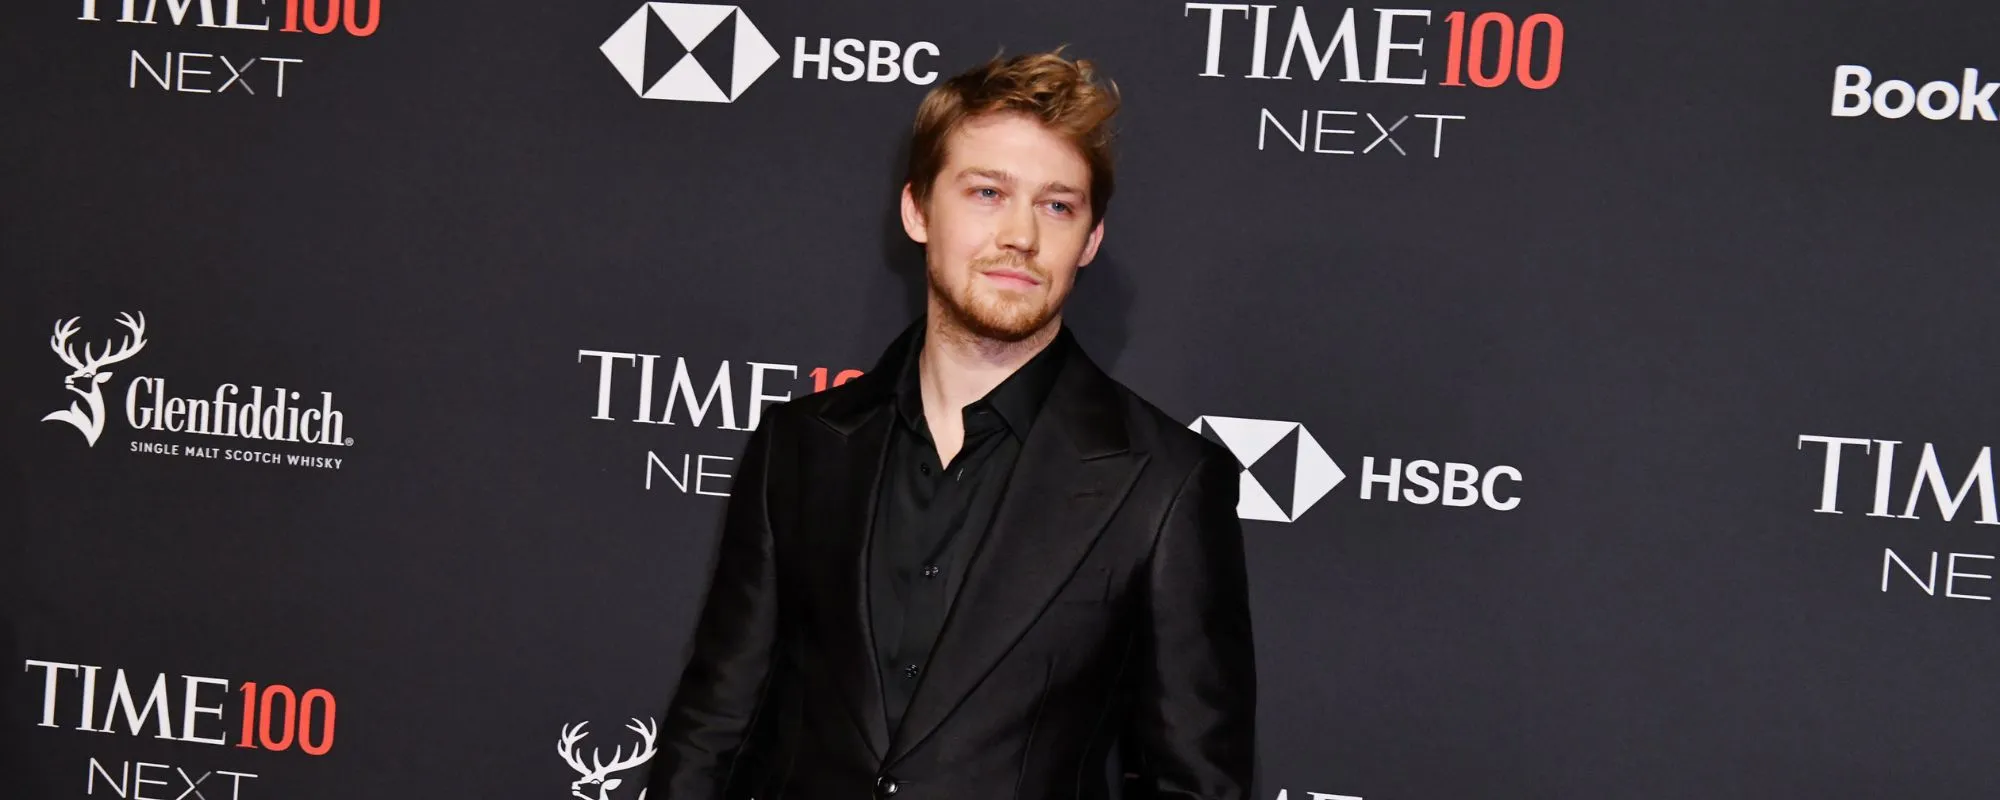 Taylor Swift’s Ex Joe Alwyn May Continue to Cash in on Relationship, Source Says